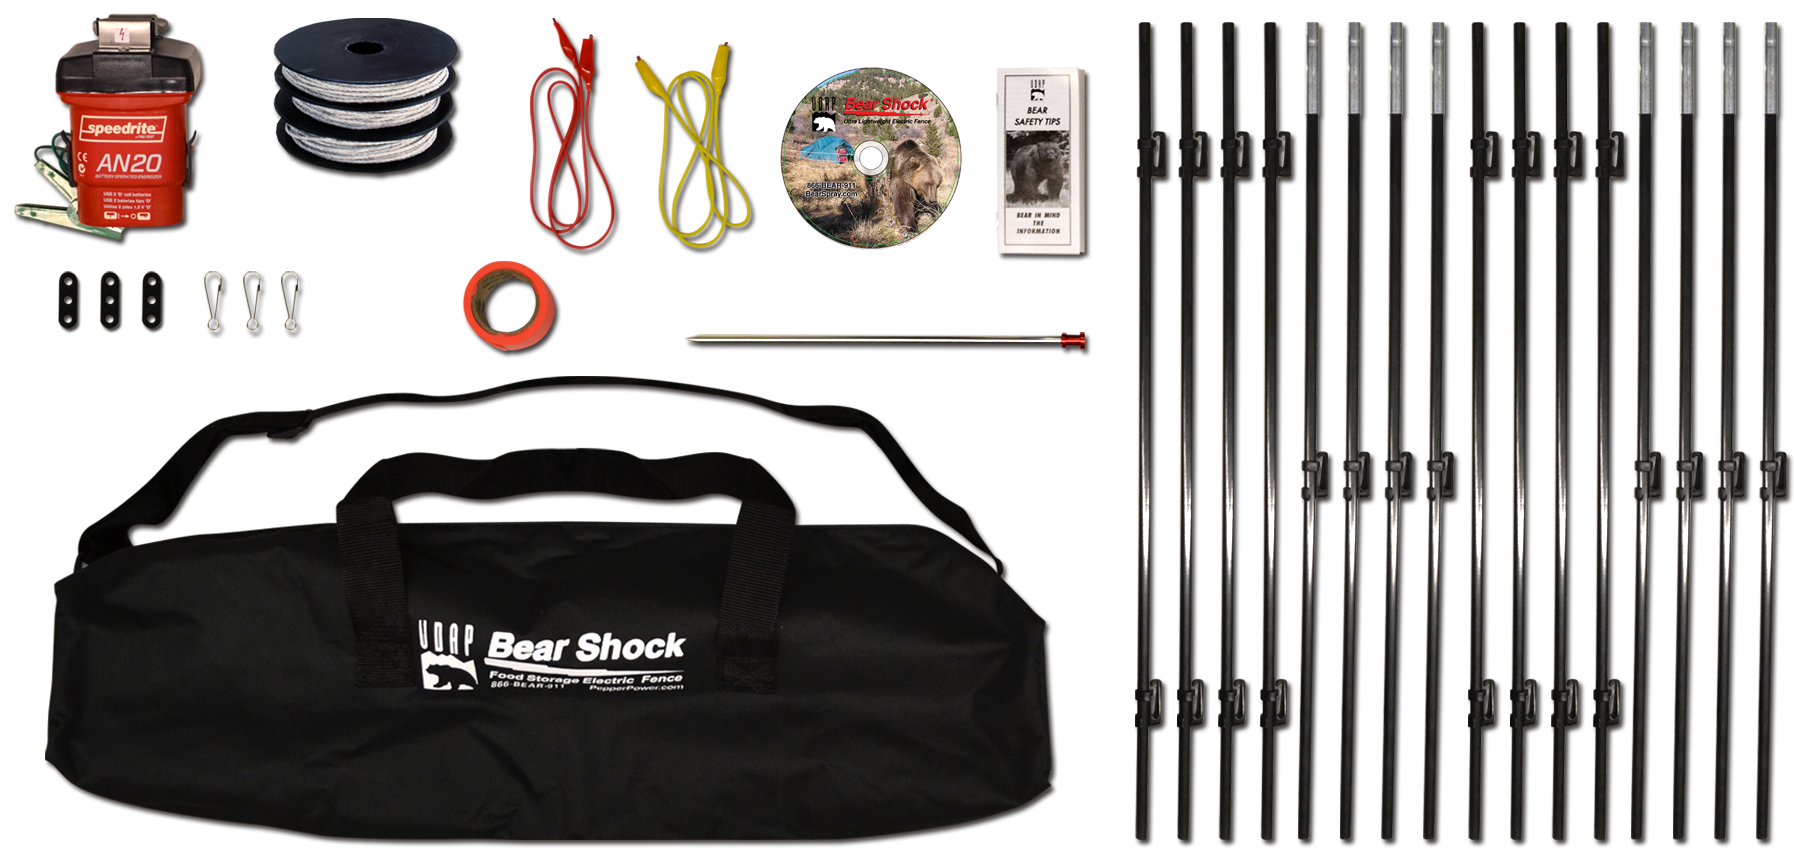 UDAP Bear Shock Outfitter Camp Perimeter Fence | Bass Pro Shops